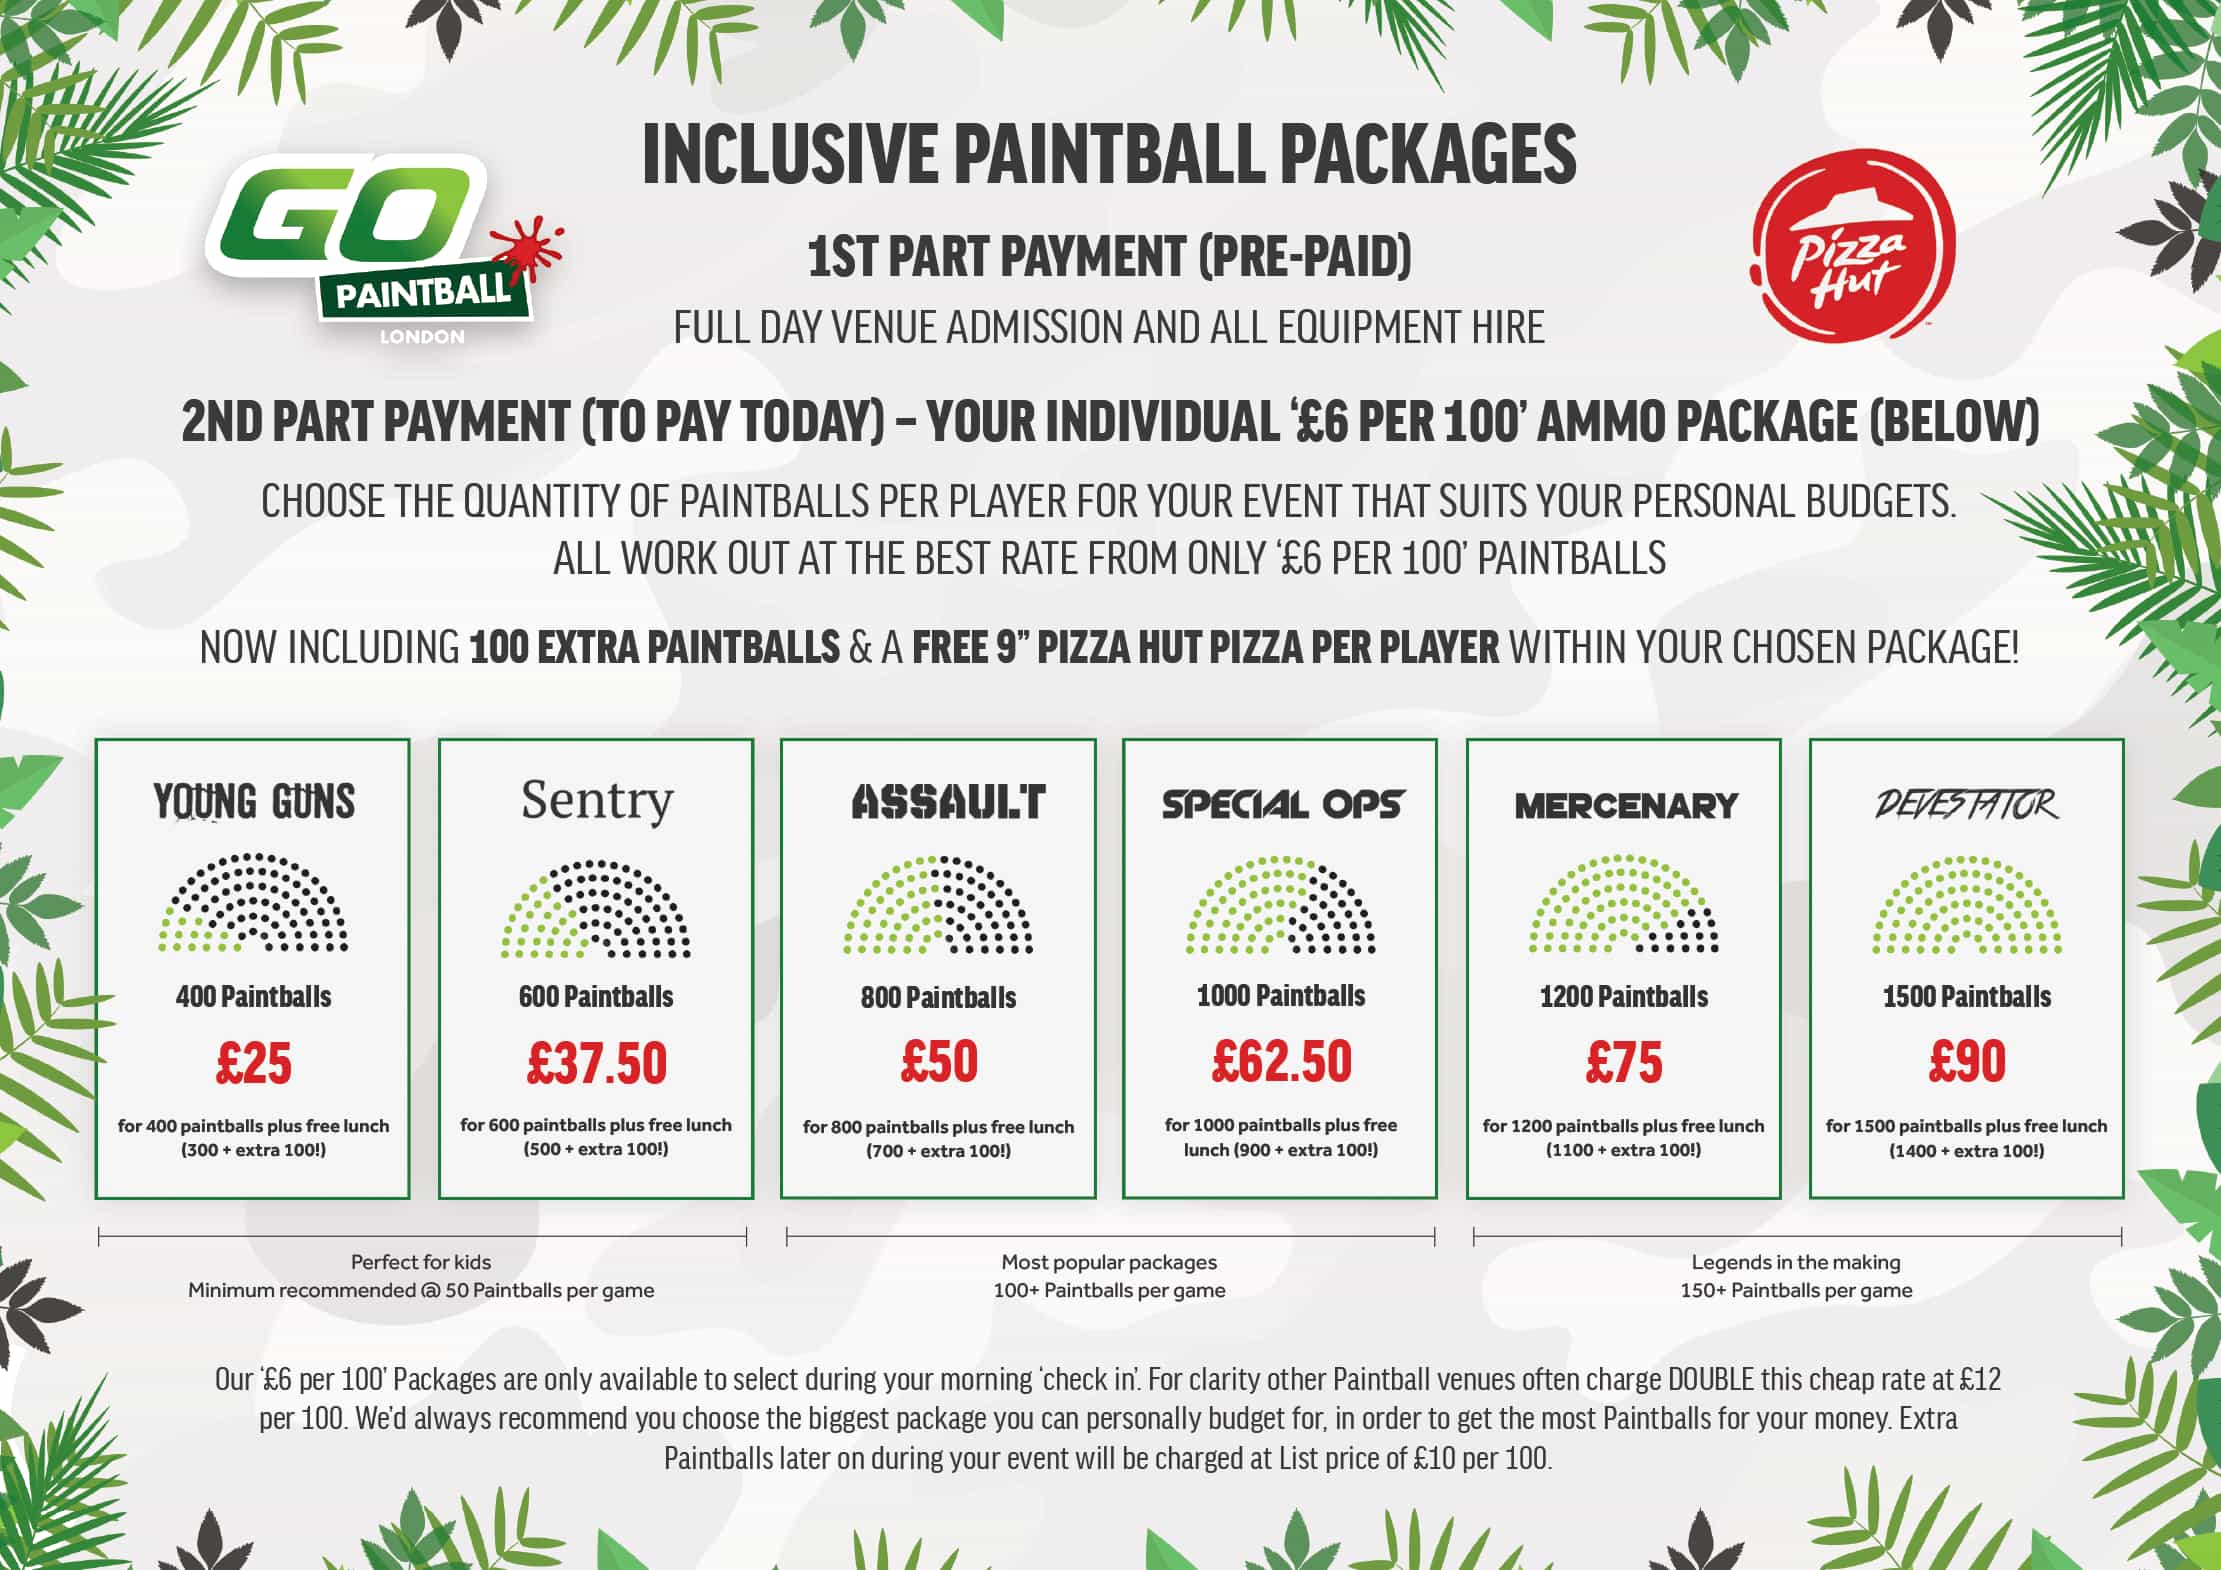 Go Paintball Inclusive Paintball Package